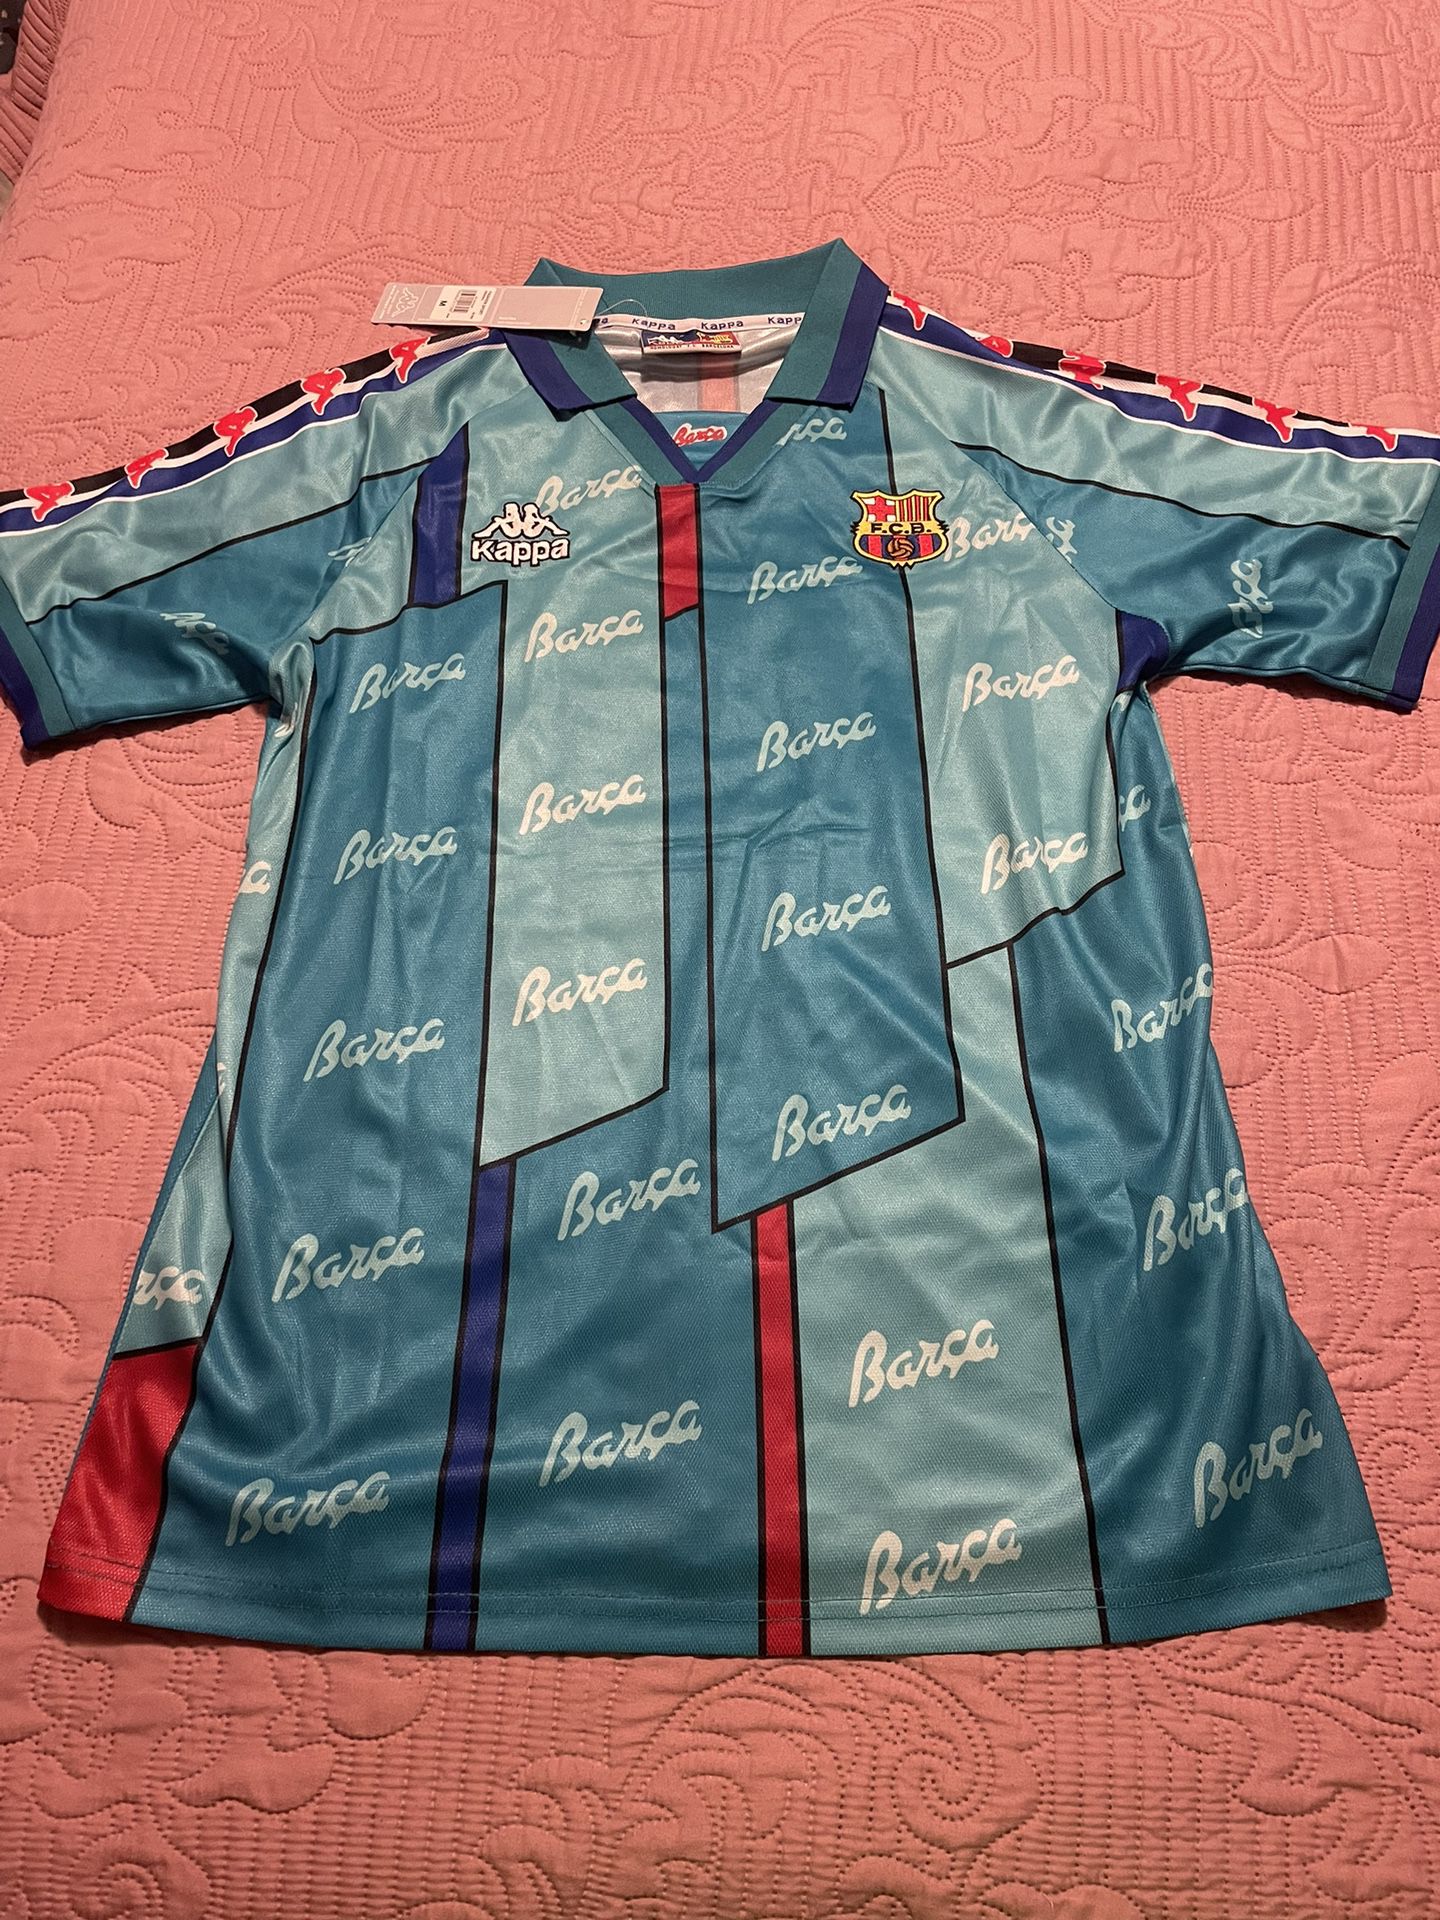 Fc Barcelona 1(contact info removed) Retro Jersey for Sale in